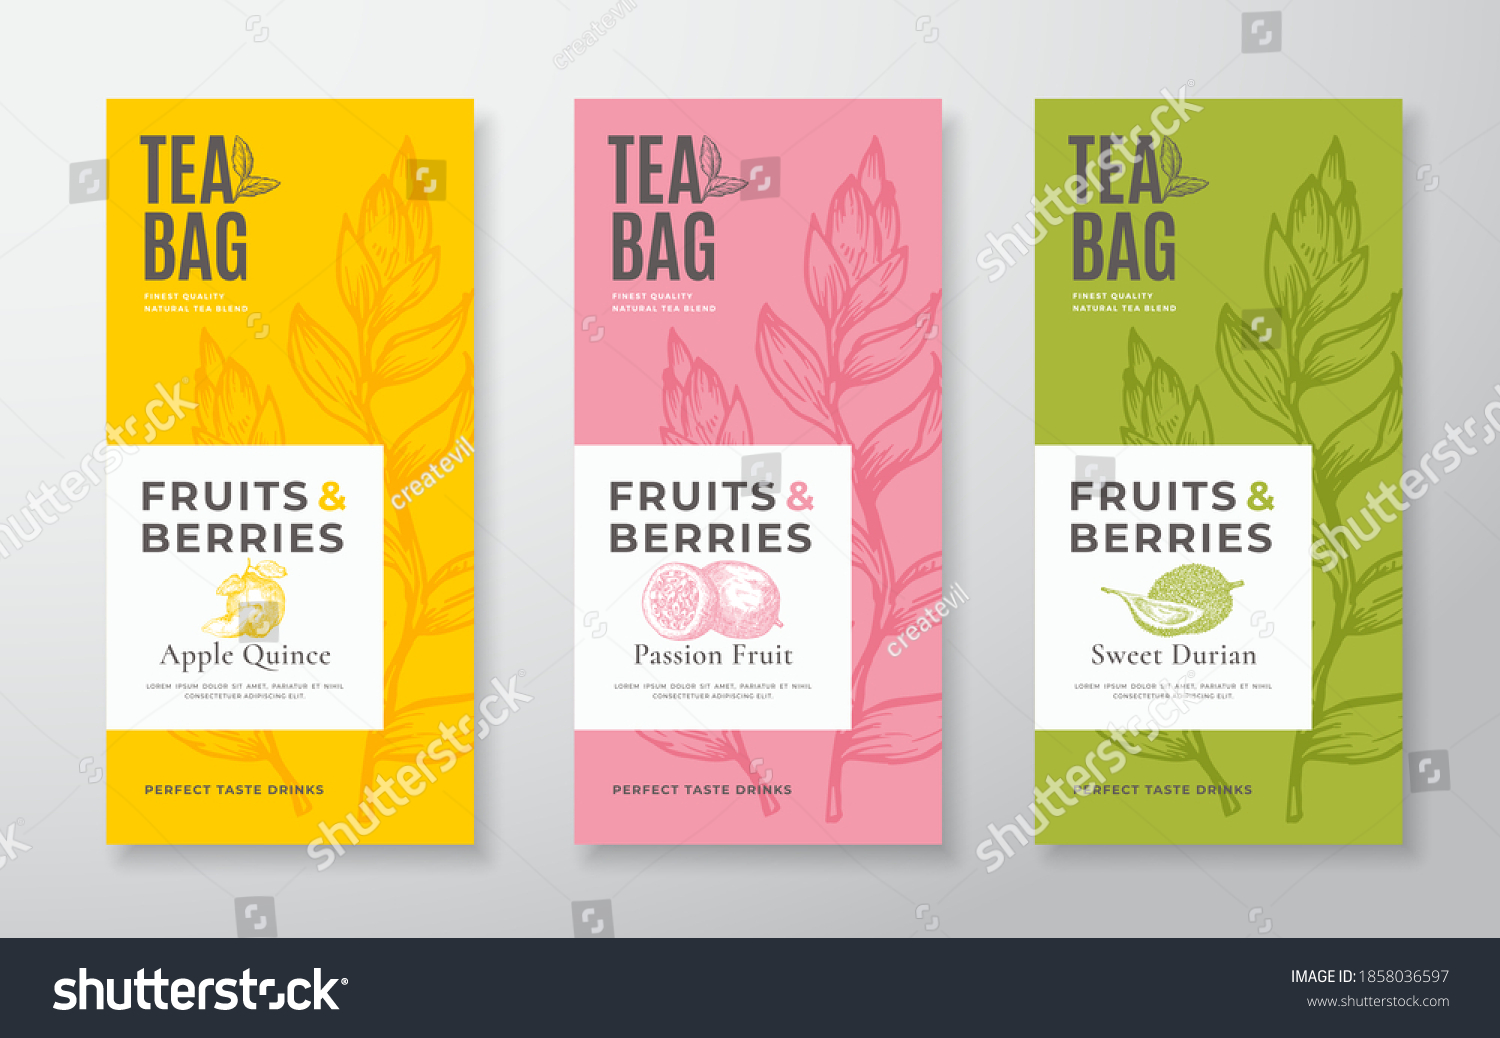 Exotic Fruits Tea Labels Set. Vector Packaging Design Layouts Bundle. Modern Typography, Hand Drawn Tea Leaves, Quince, Passion Fruit and Durian Silhouettes Background. Beverage Banners. Isolated. #1858036597